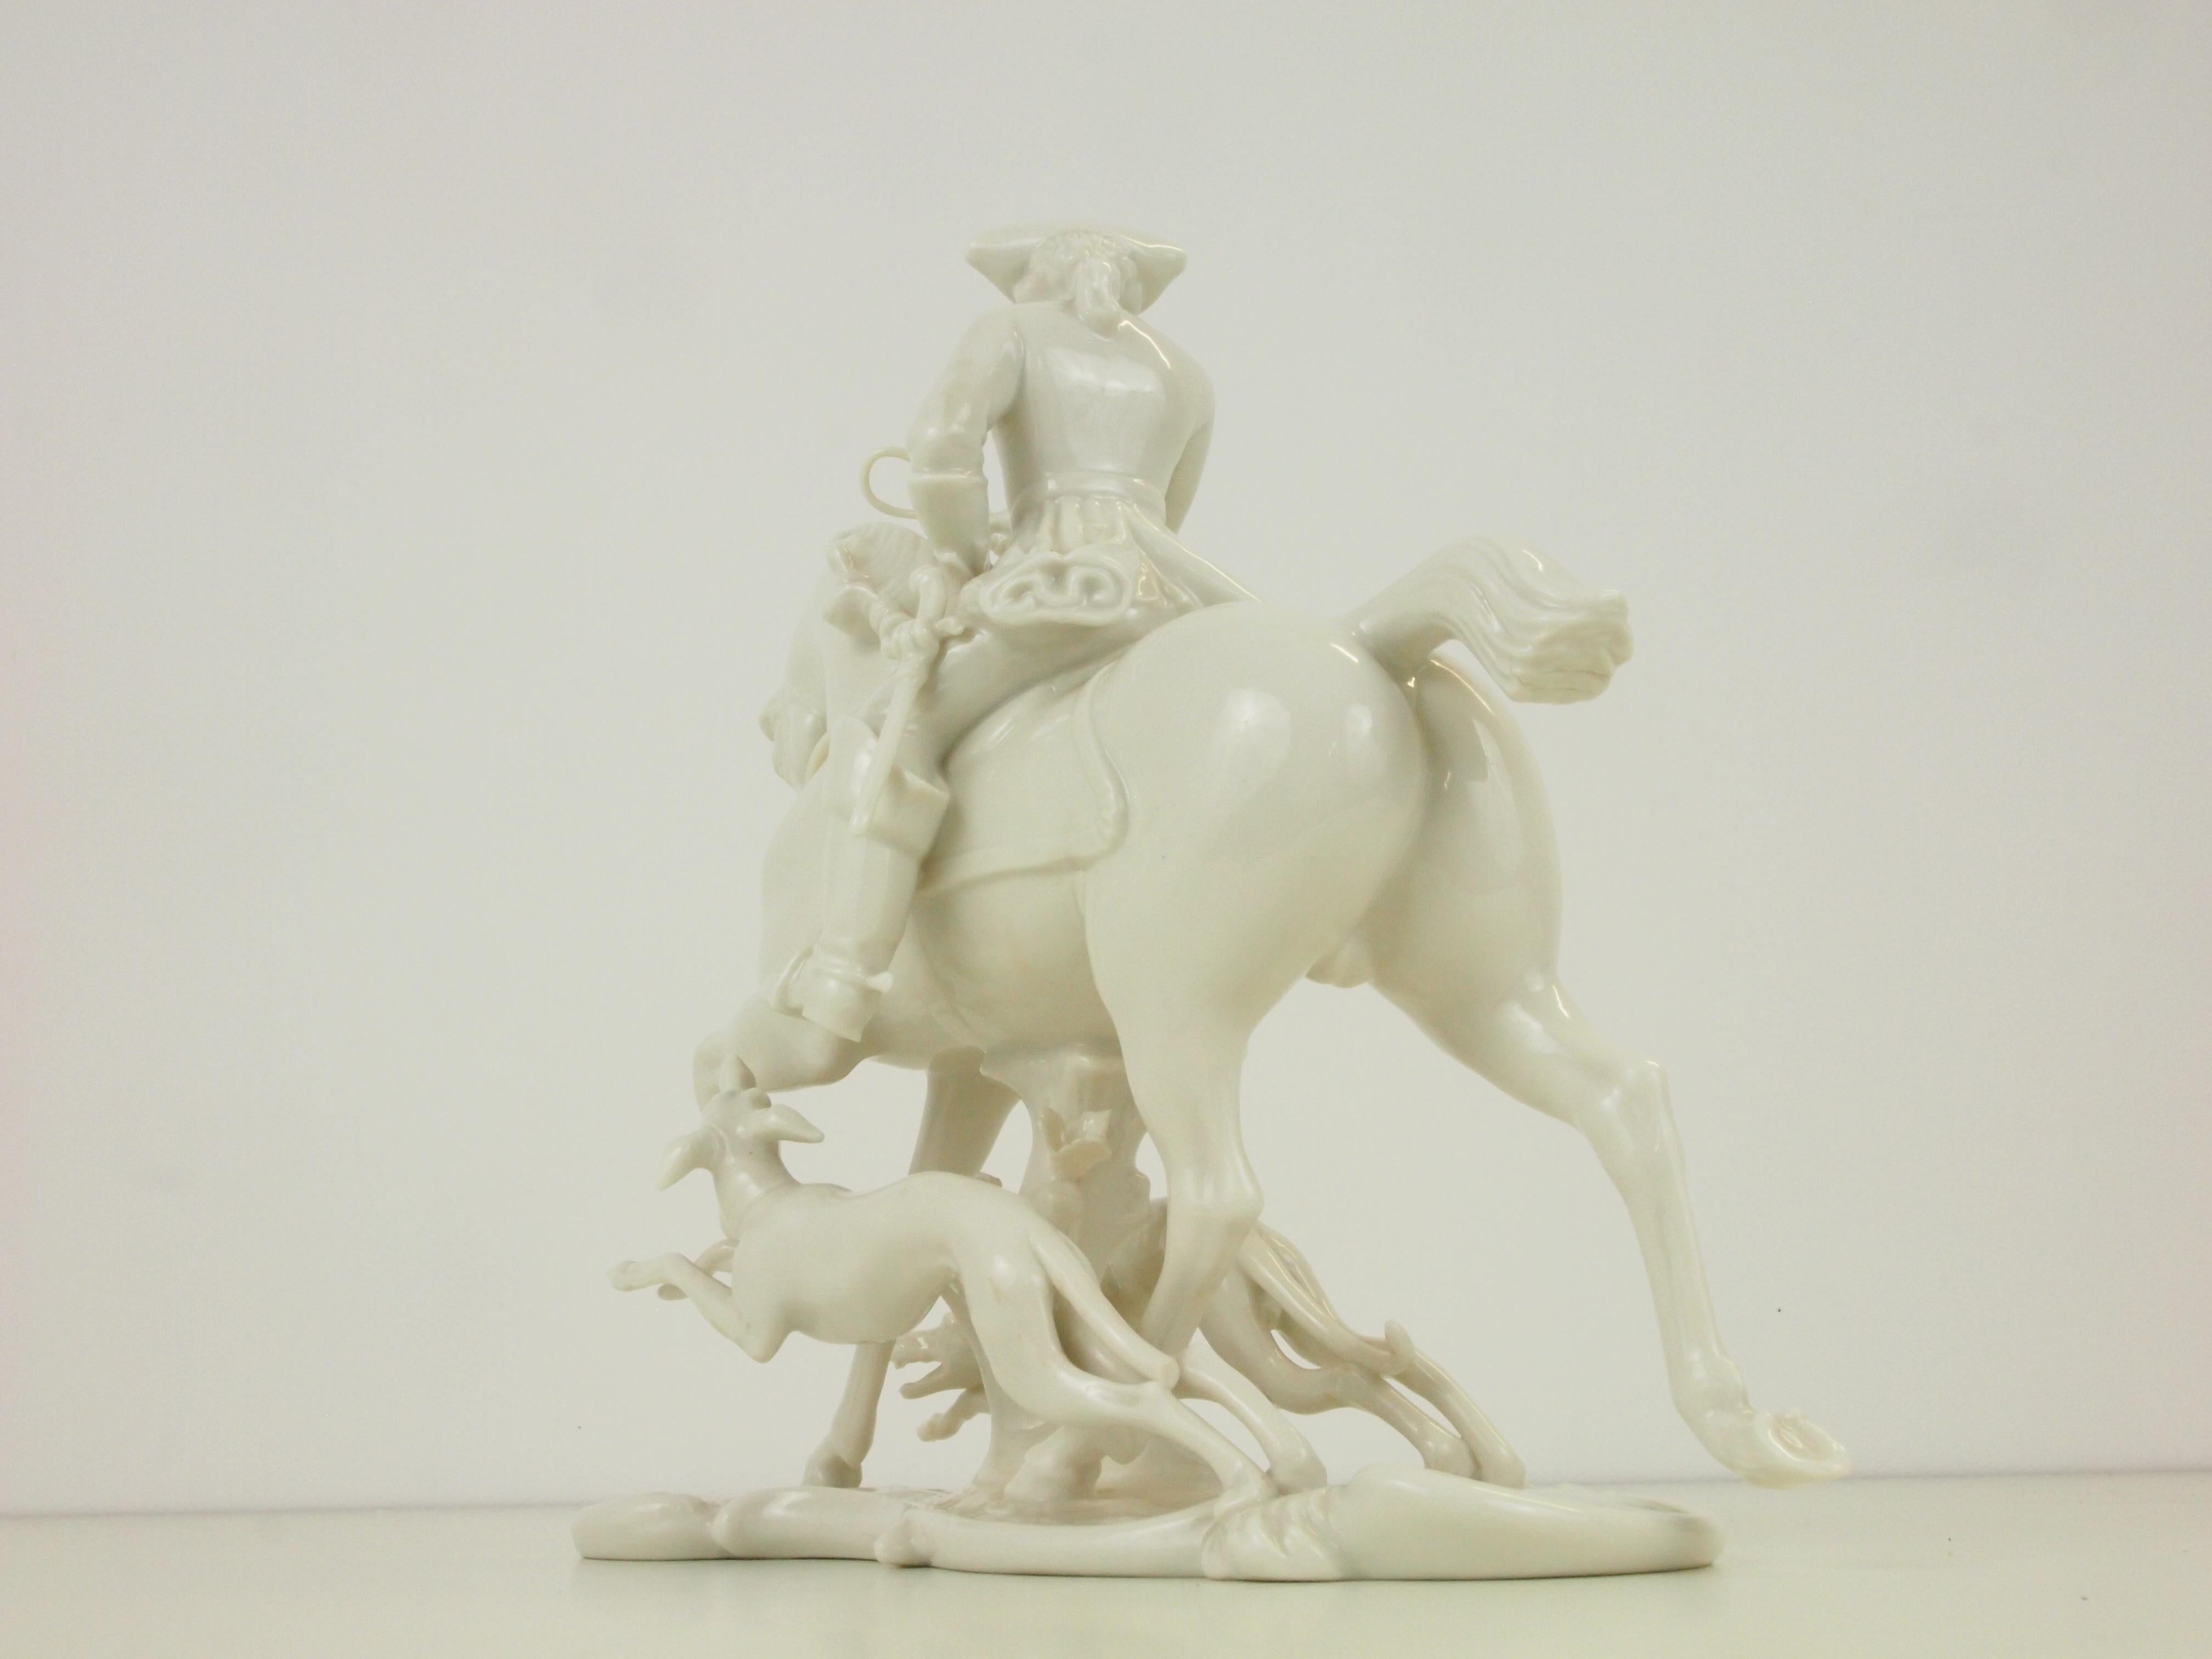 Nymphenburg Porcelain Figurine Depicting a Horse Rider in a Hunting Scene For Sale 6